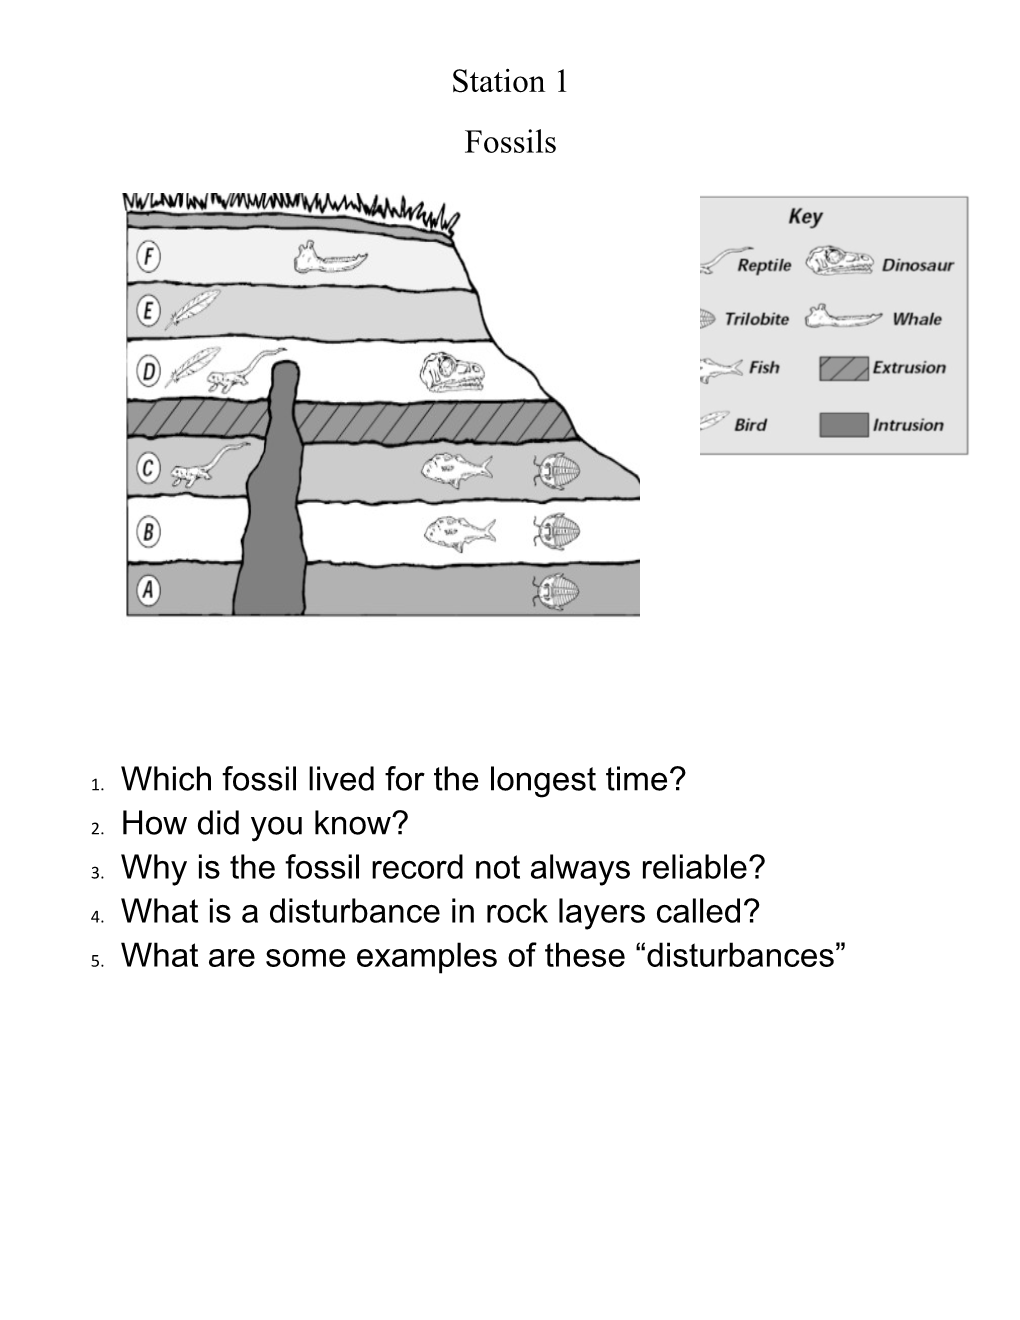 1. Which Fossil Lived for the Longest Time?